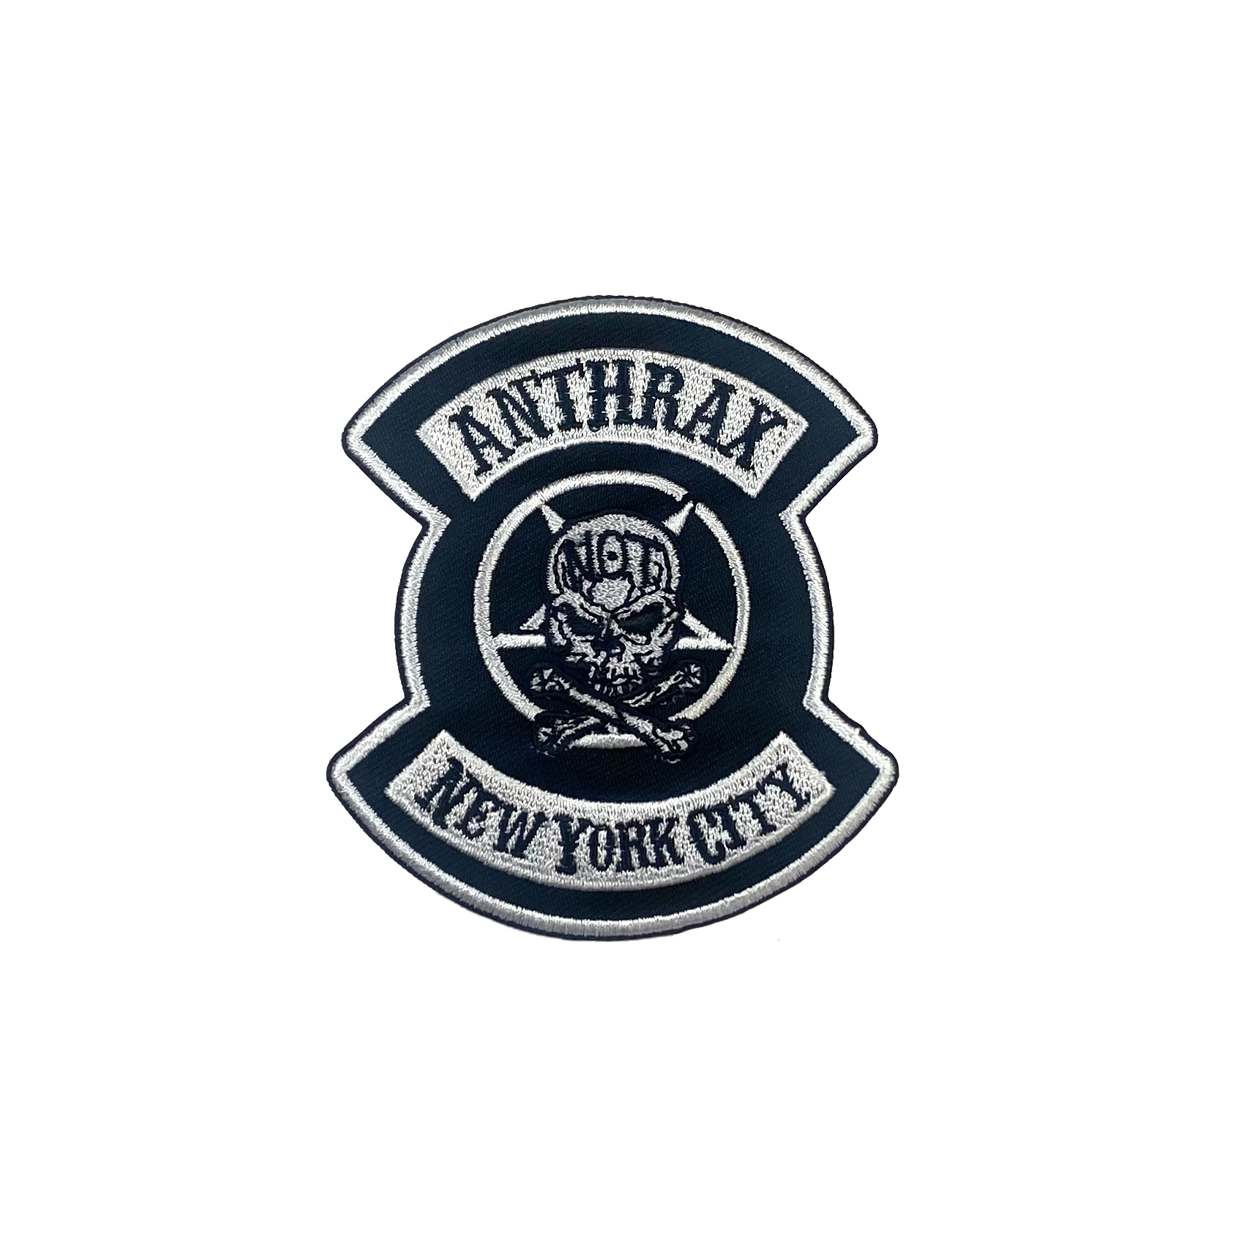 ANTHRAX NYC EMBROIDERED PATCH